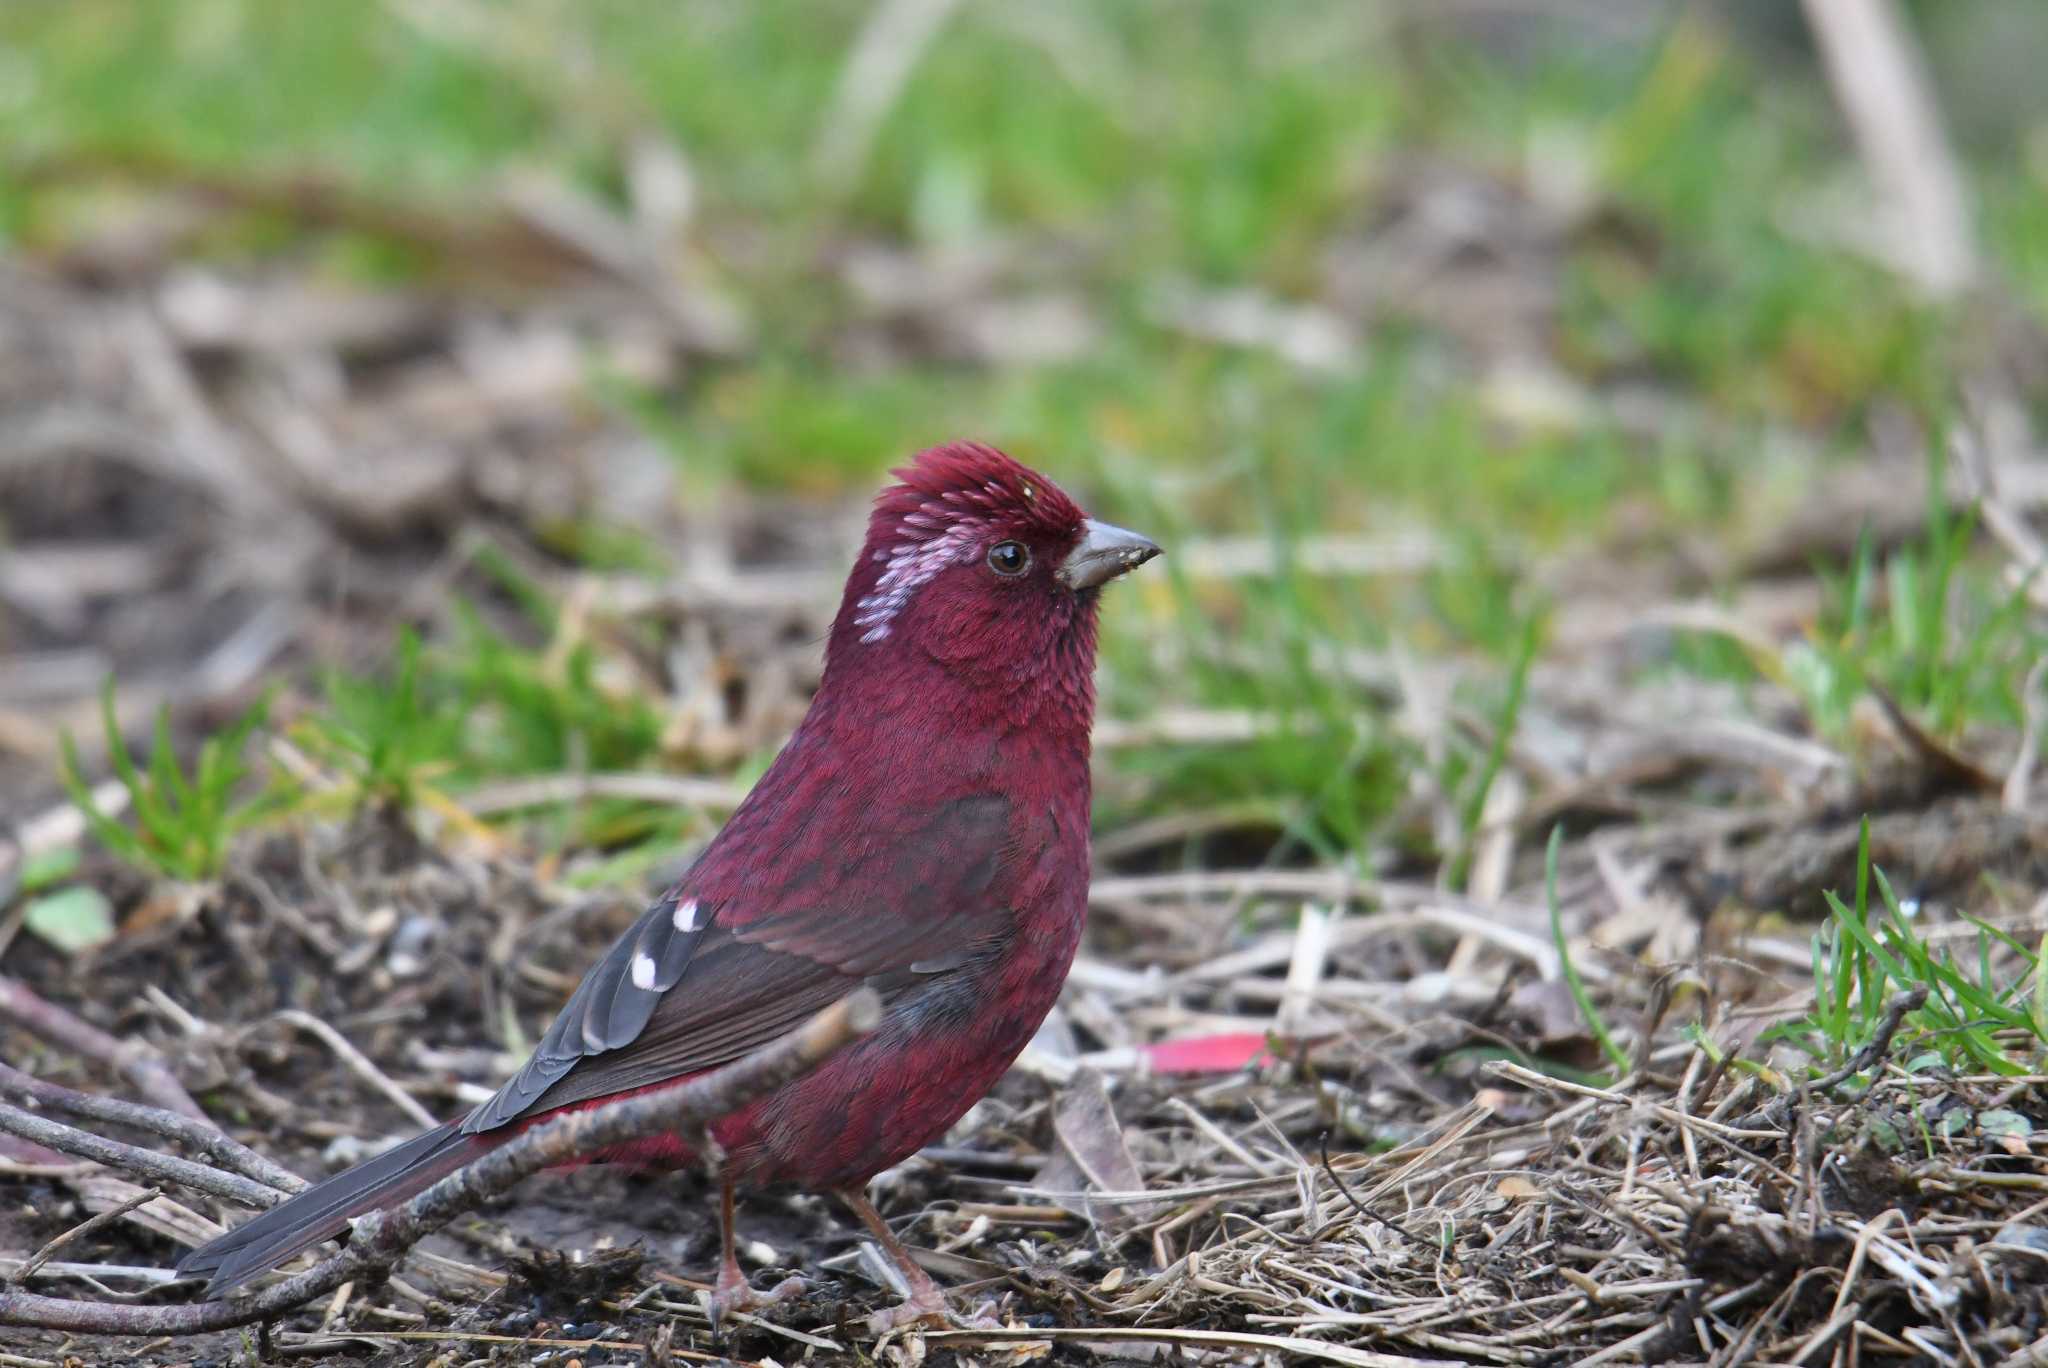 Photo of Taiwan Rosefinch at 大雪山国家森林遊楽区 by あひる